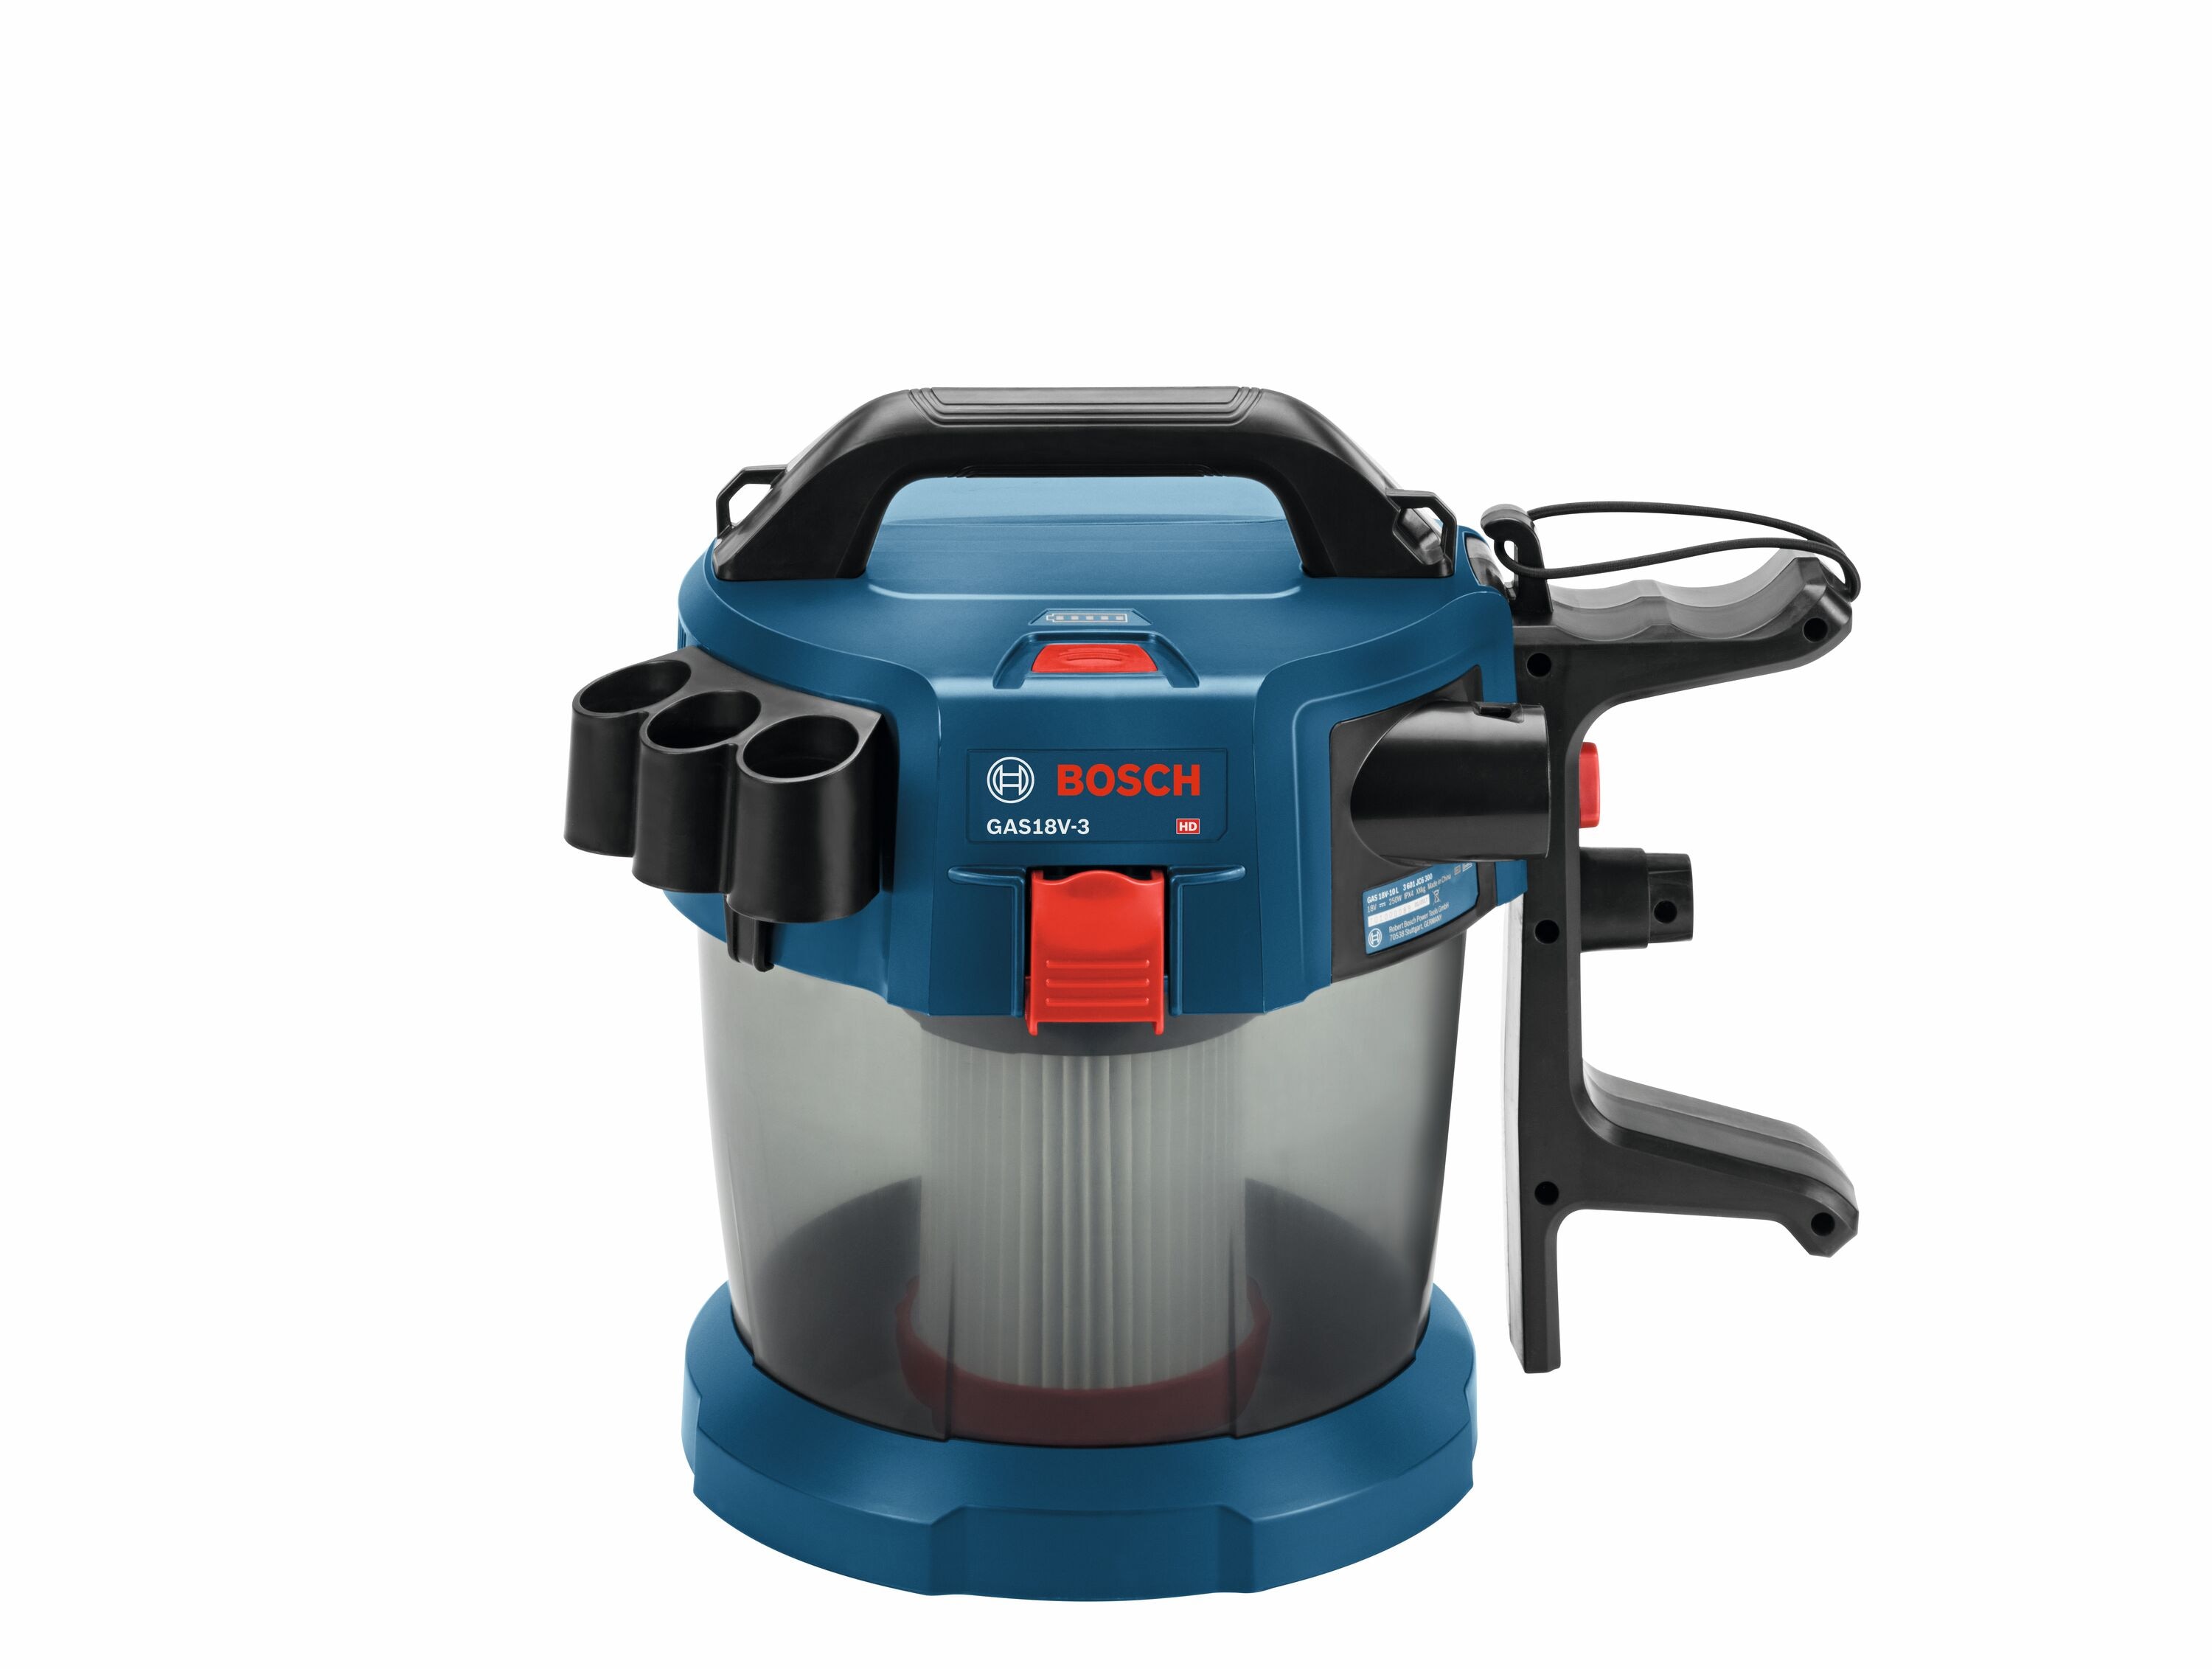 Bosch 2.6-Gallons 7-HP Cordless Wet/Dry Shop Vacuum (Bare Tool) in